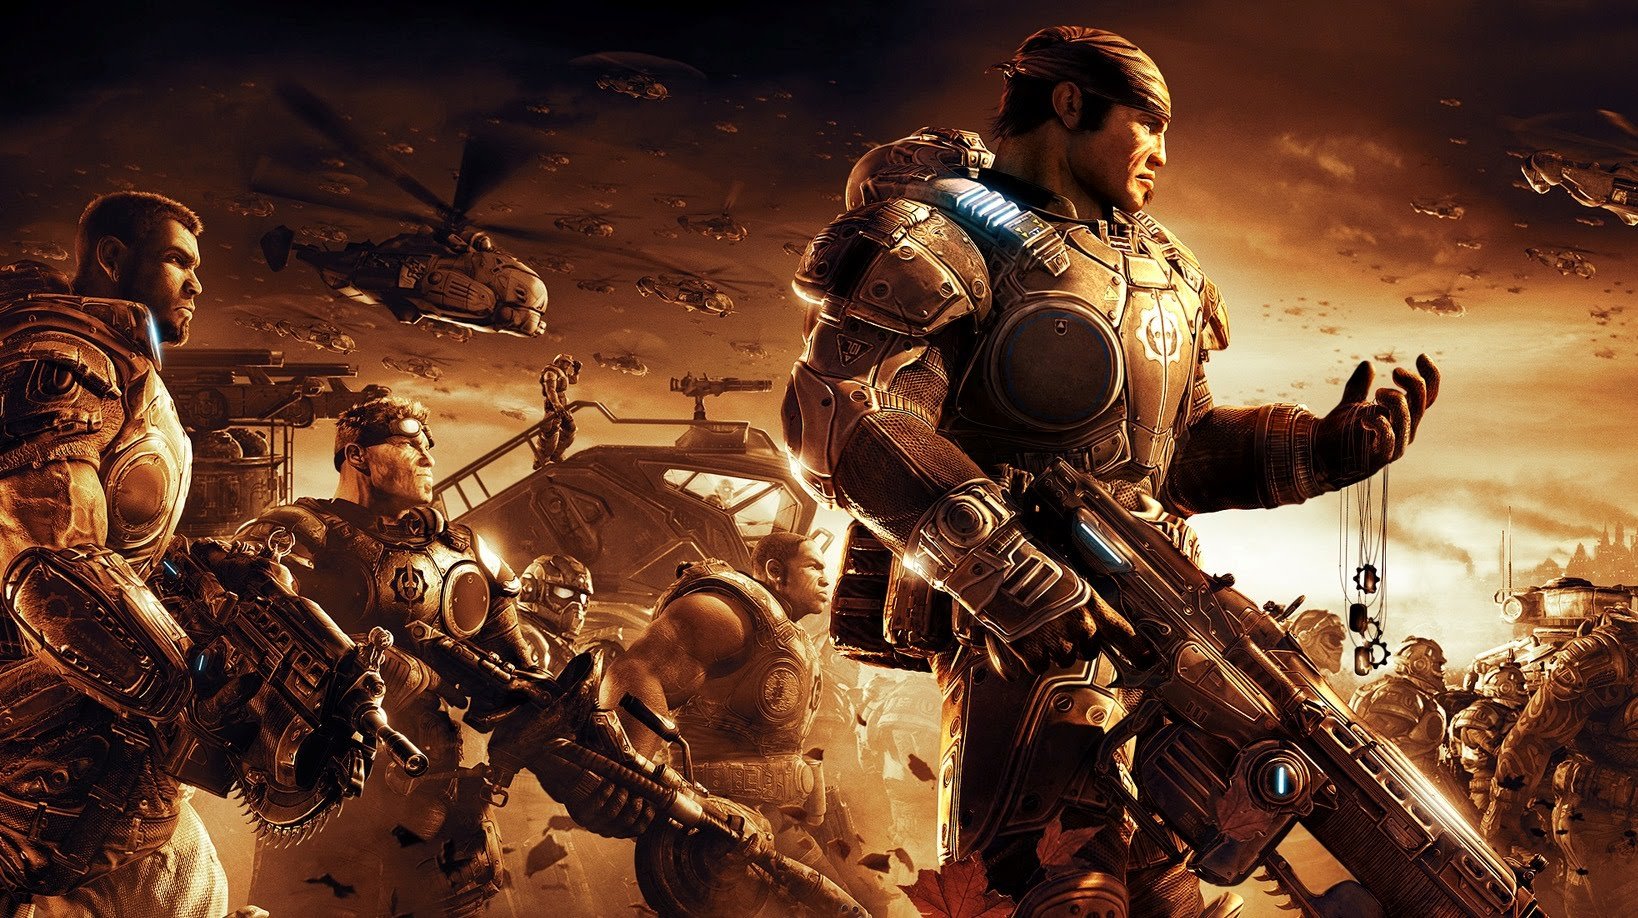 Gears of War: Ultimate Edition Xbox One Review: Now That's What I Call a  Remaster